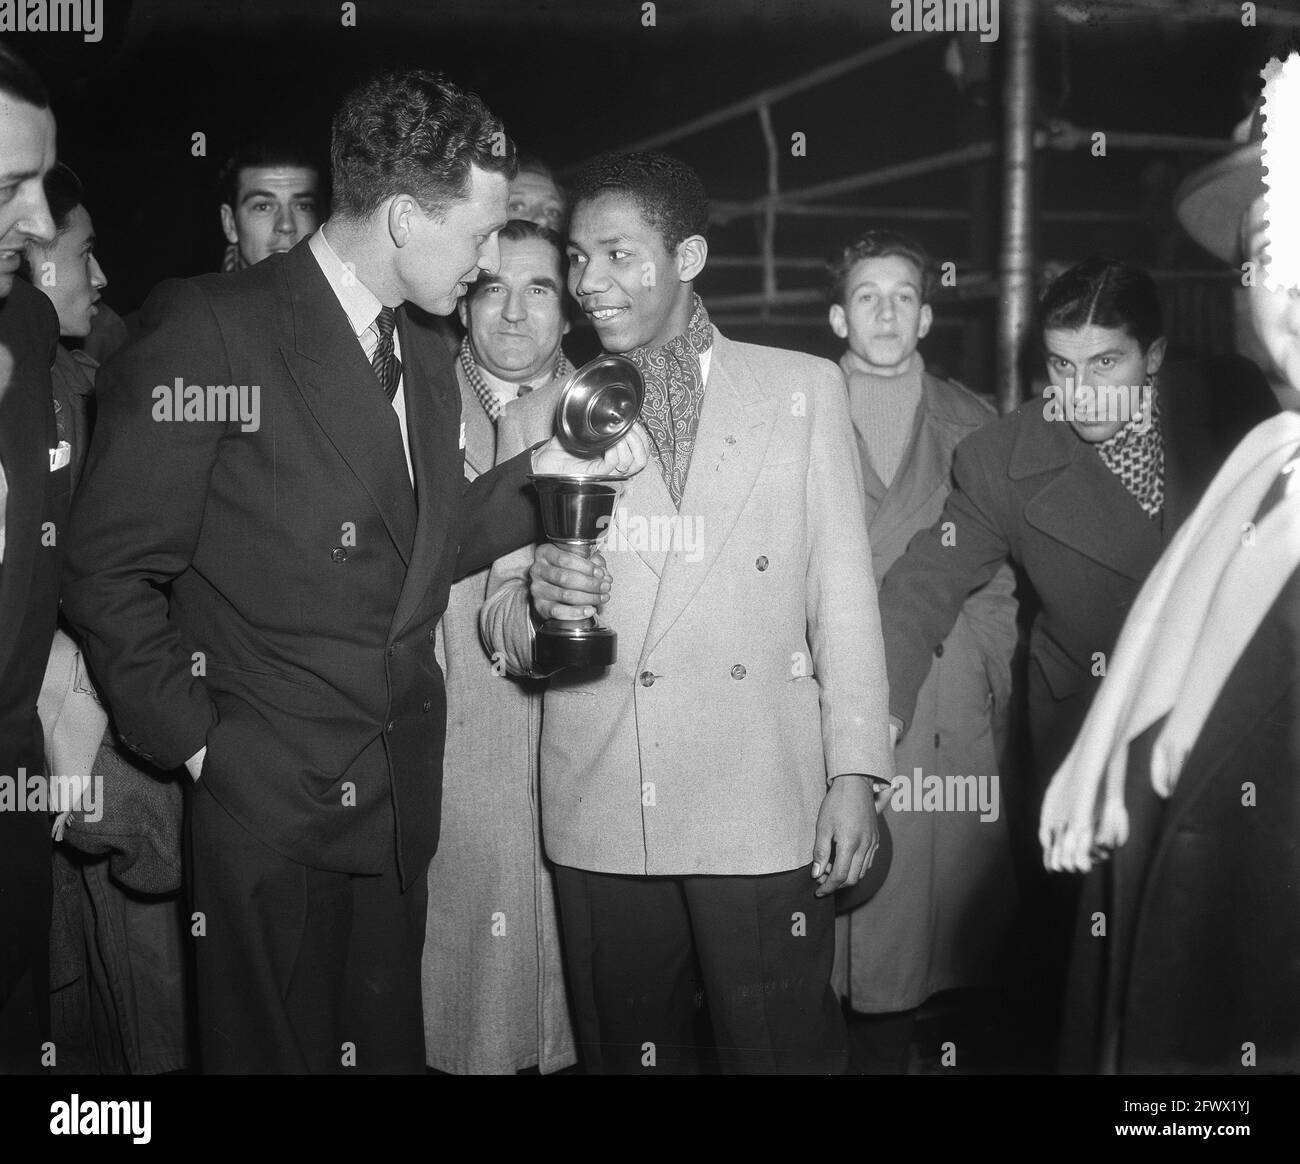 Assignments Coca Cola Boxing. Harry Bos against Anglee, December 10, 1952,  BOKSEN, Assignments, The Netherlands, 20th century press agency photo, news  to remember, documentary, historic photography 1945-1990, visual stories,  human history of